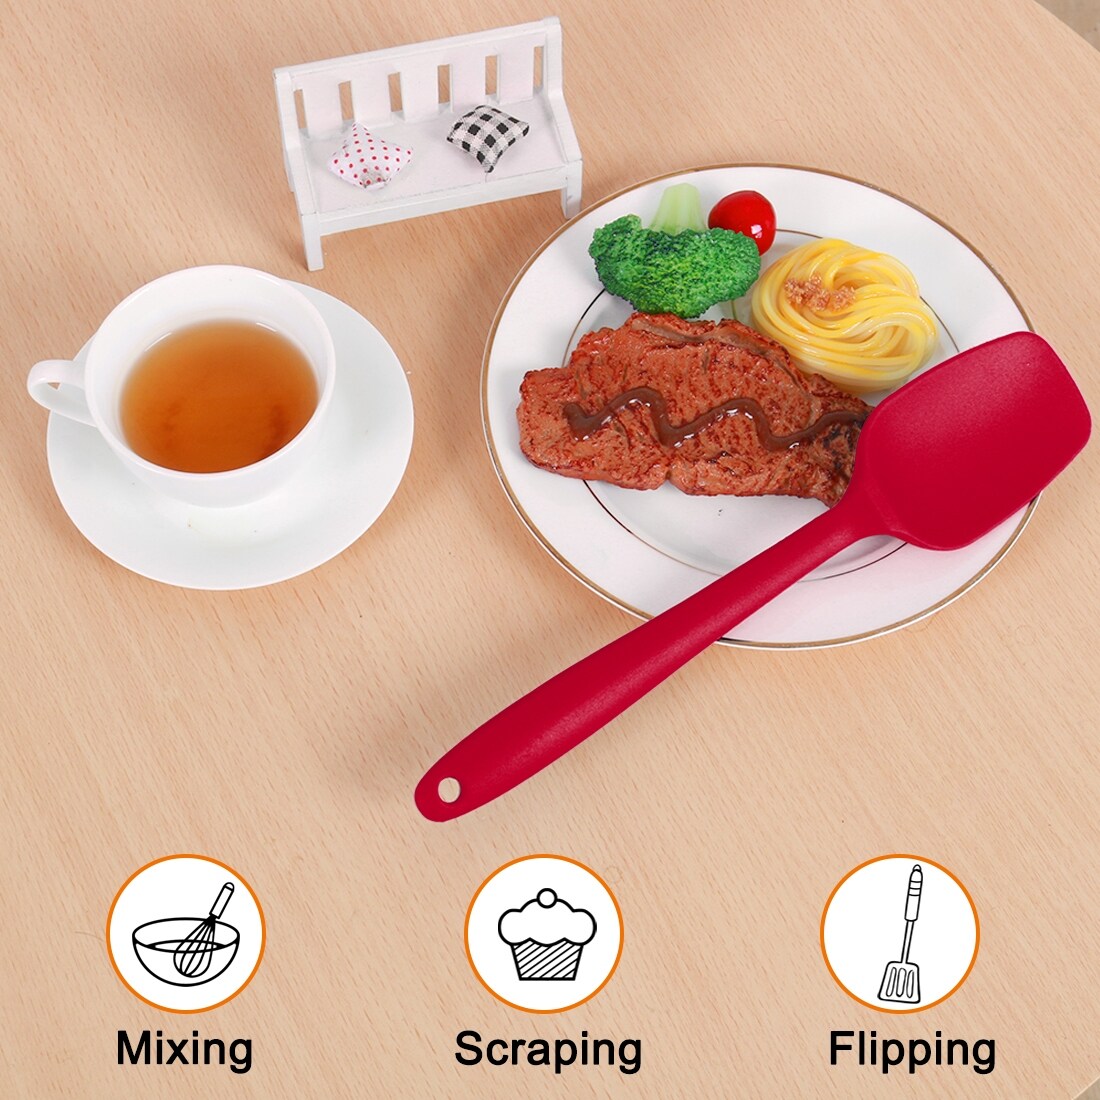 https://ak1.ostkcdn.com/images/products/is/images/direct/9c093cde4bae3a6798a061ac49c326addab28a22/Silicone-Spatula-Set-2-Pcs-Heat-Resistant-Non-scratch-Kitchen-Turner-Non-Stick-Spatula-for-Baking-Scraping-Red.jpg